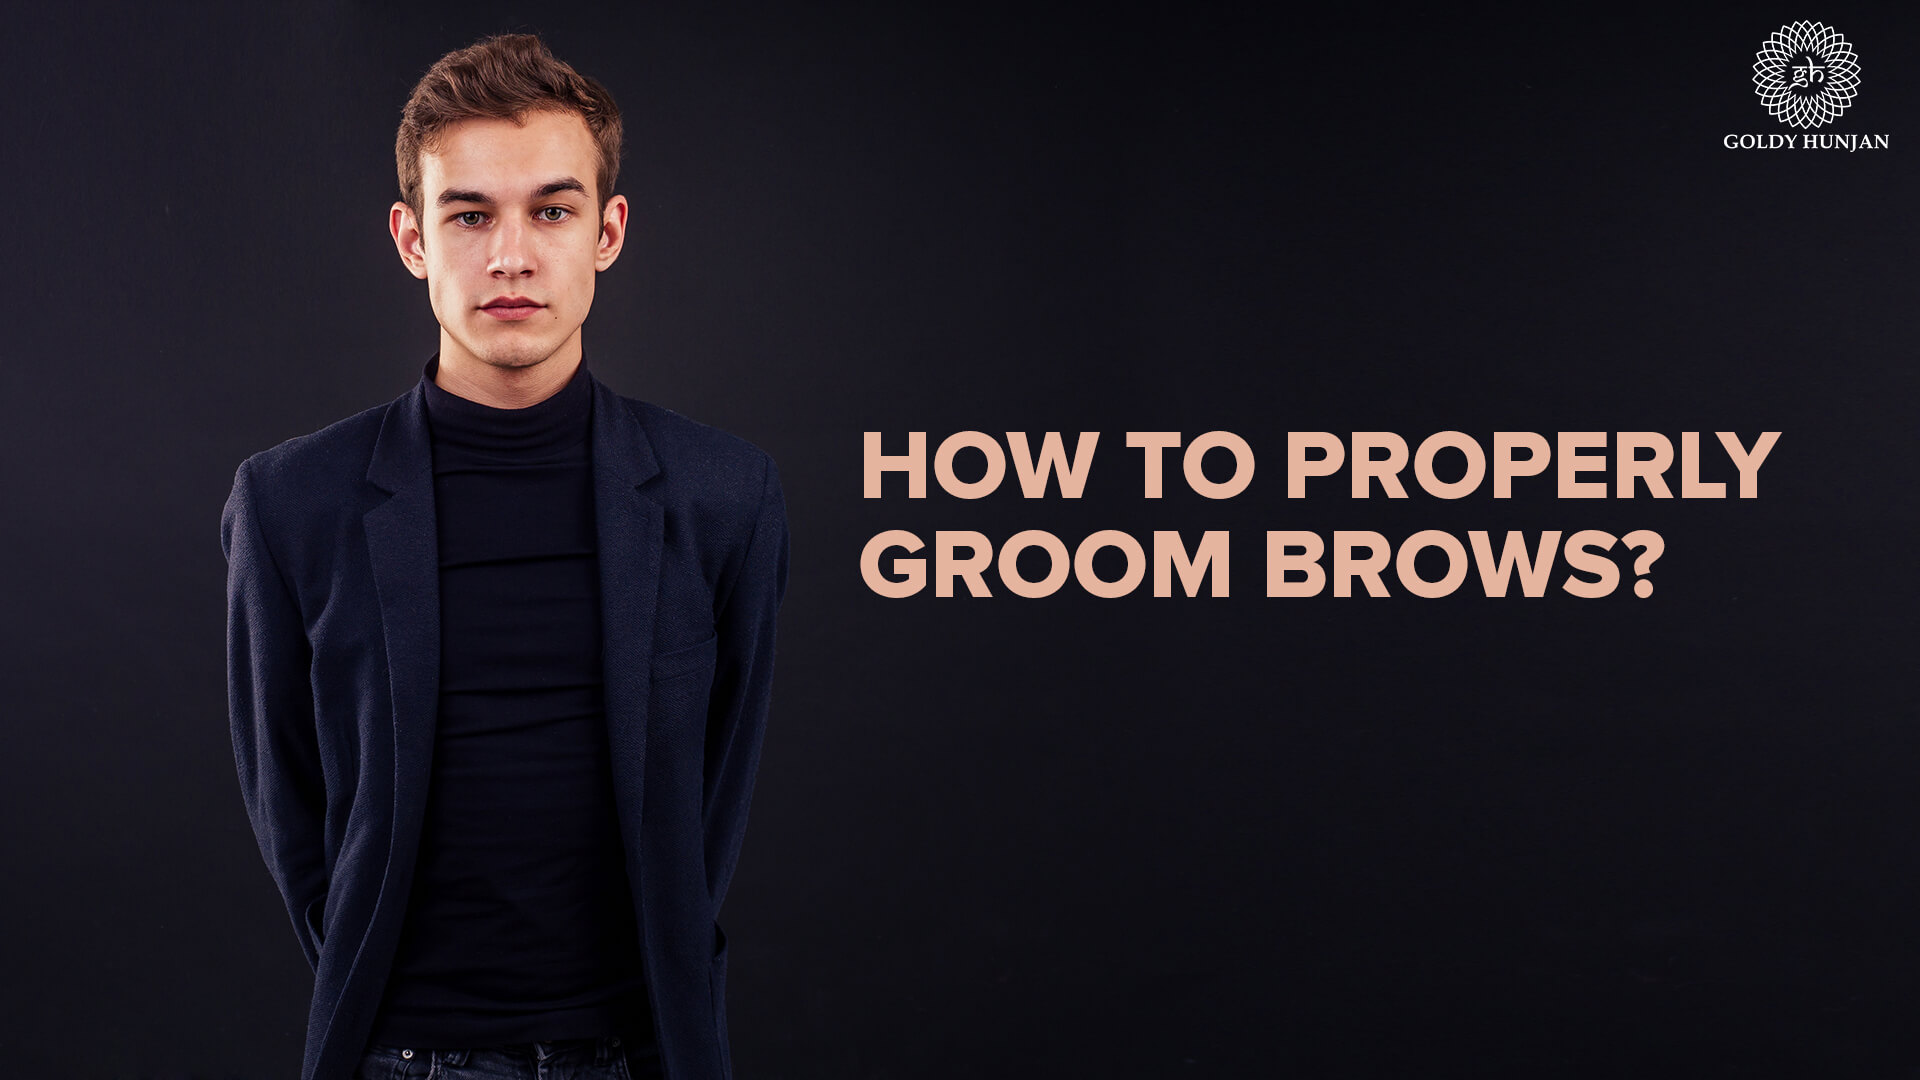 How to properly groom brows